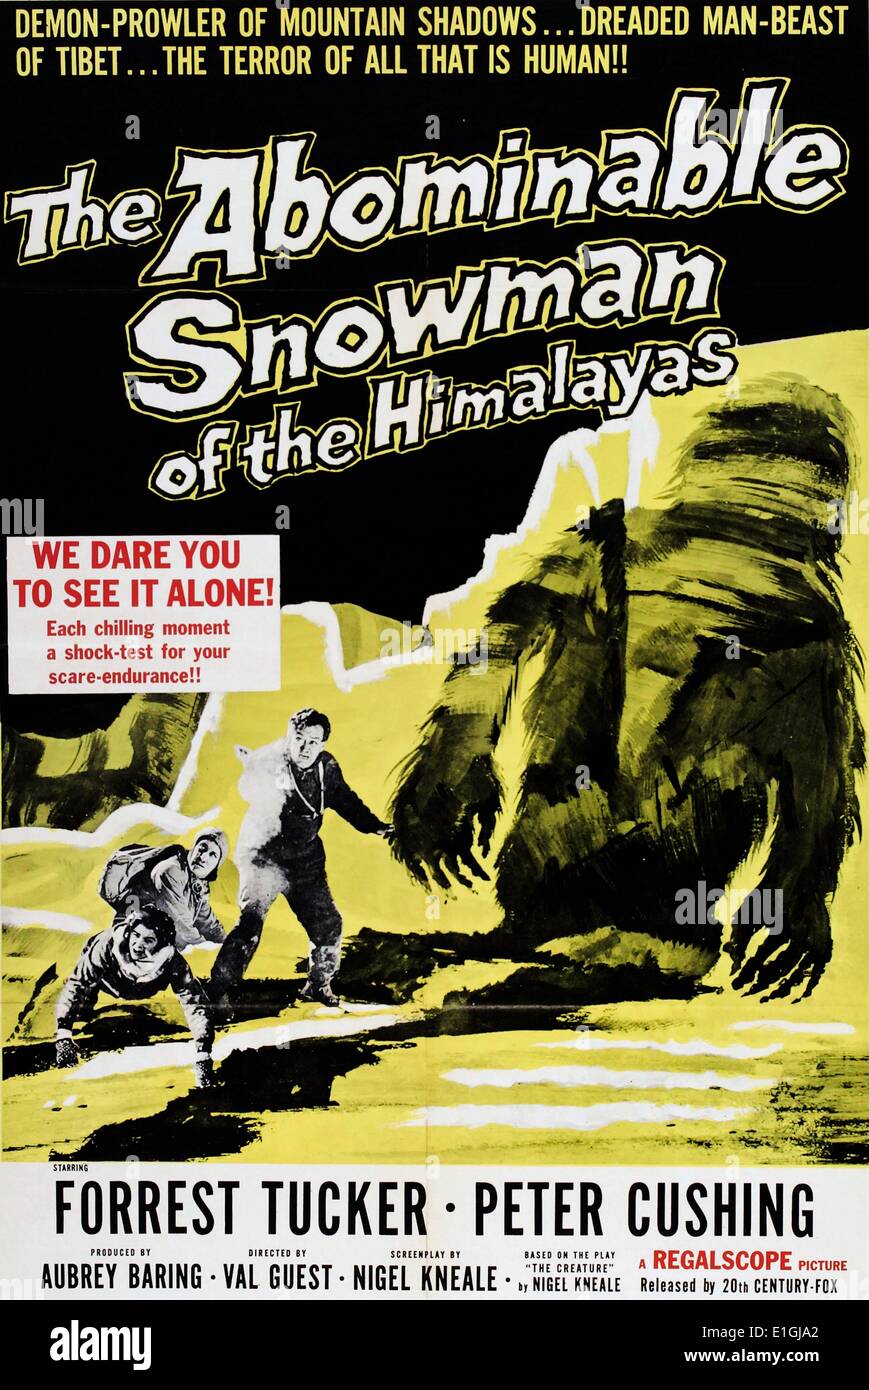 The Abominable Snowman of the Himalayas a 1957 British horror film. Stock Photo